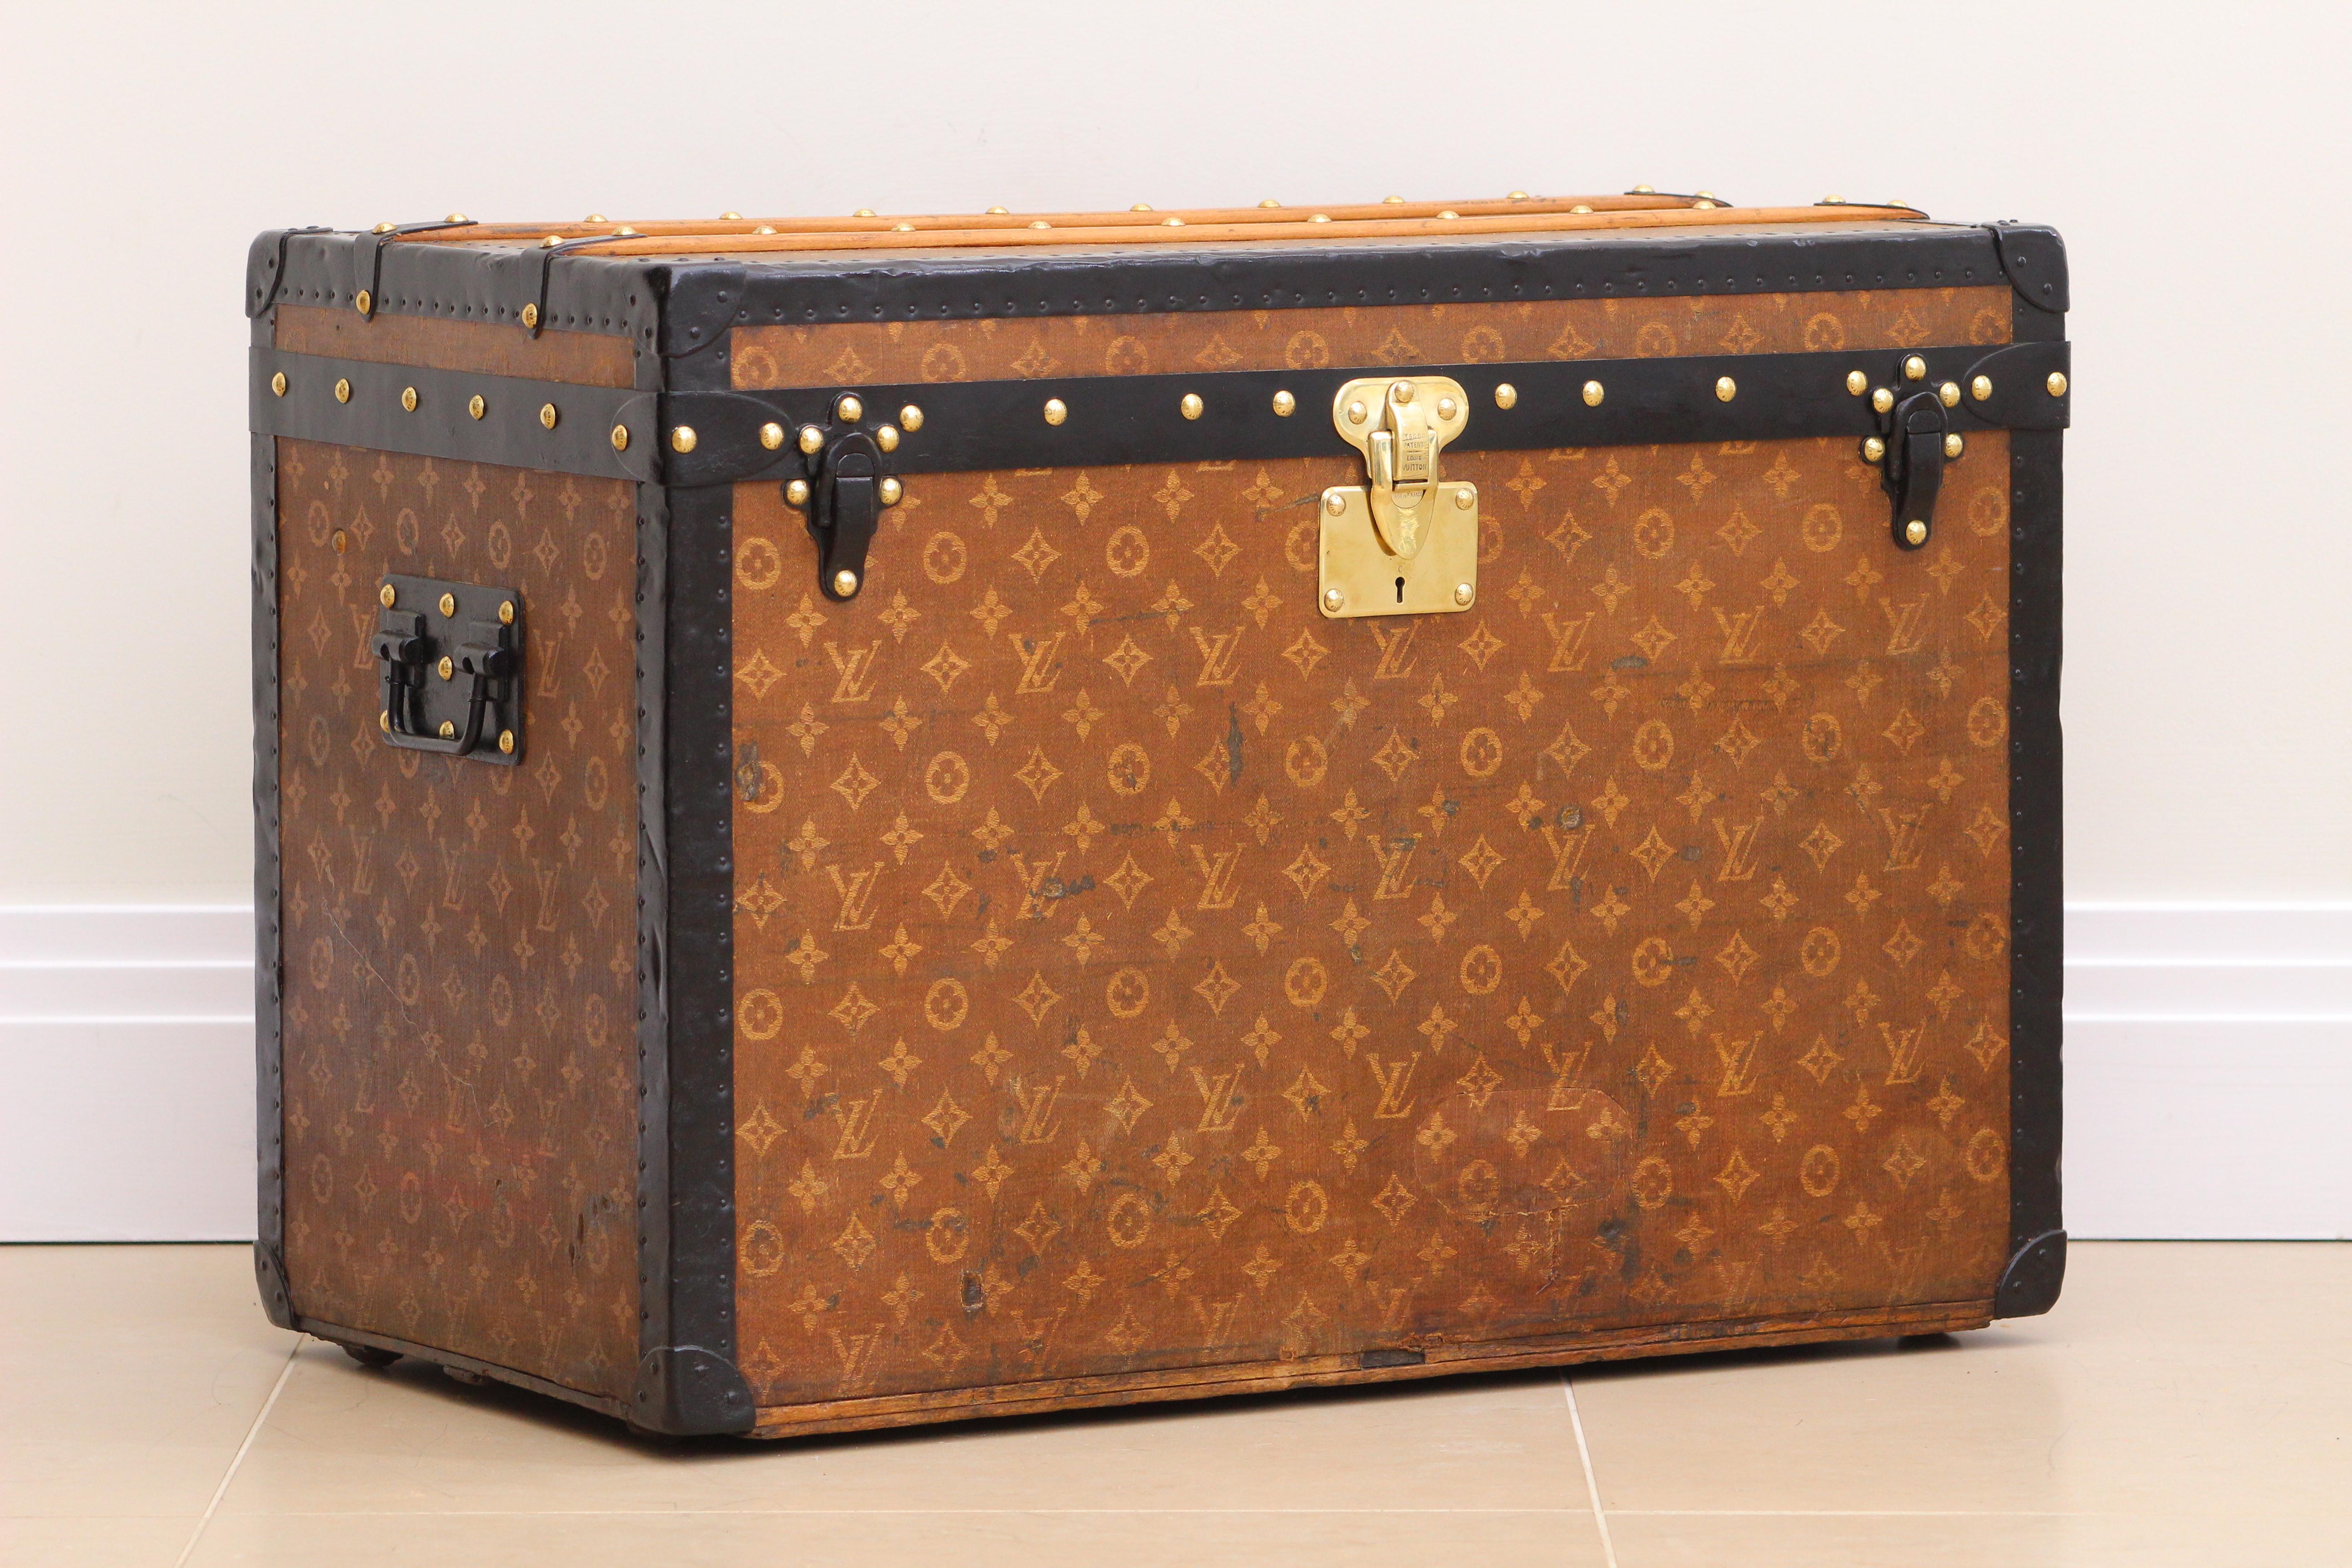 The 1900s Louis Vuitton Monogram Woven Courier Trunk is a masterclass in design, functionality, and opulence. Standing as an emblematic testament to Louis Vuitton's commitment to excellence, this trunk encapsulates over a century of luxury travel's